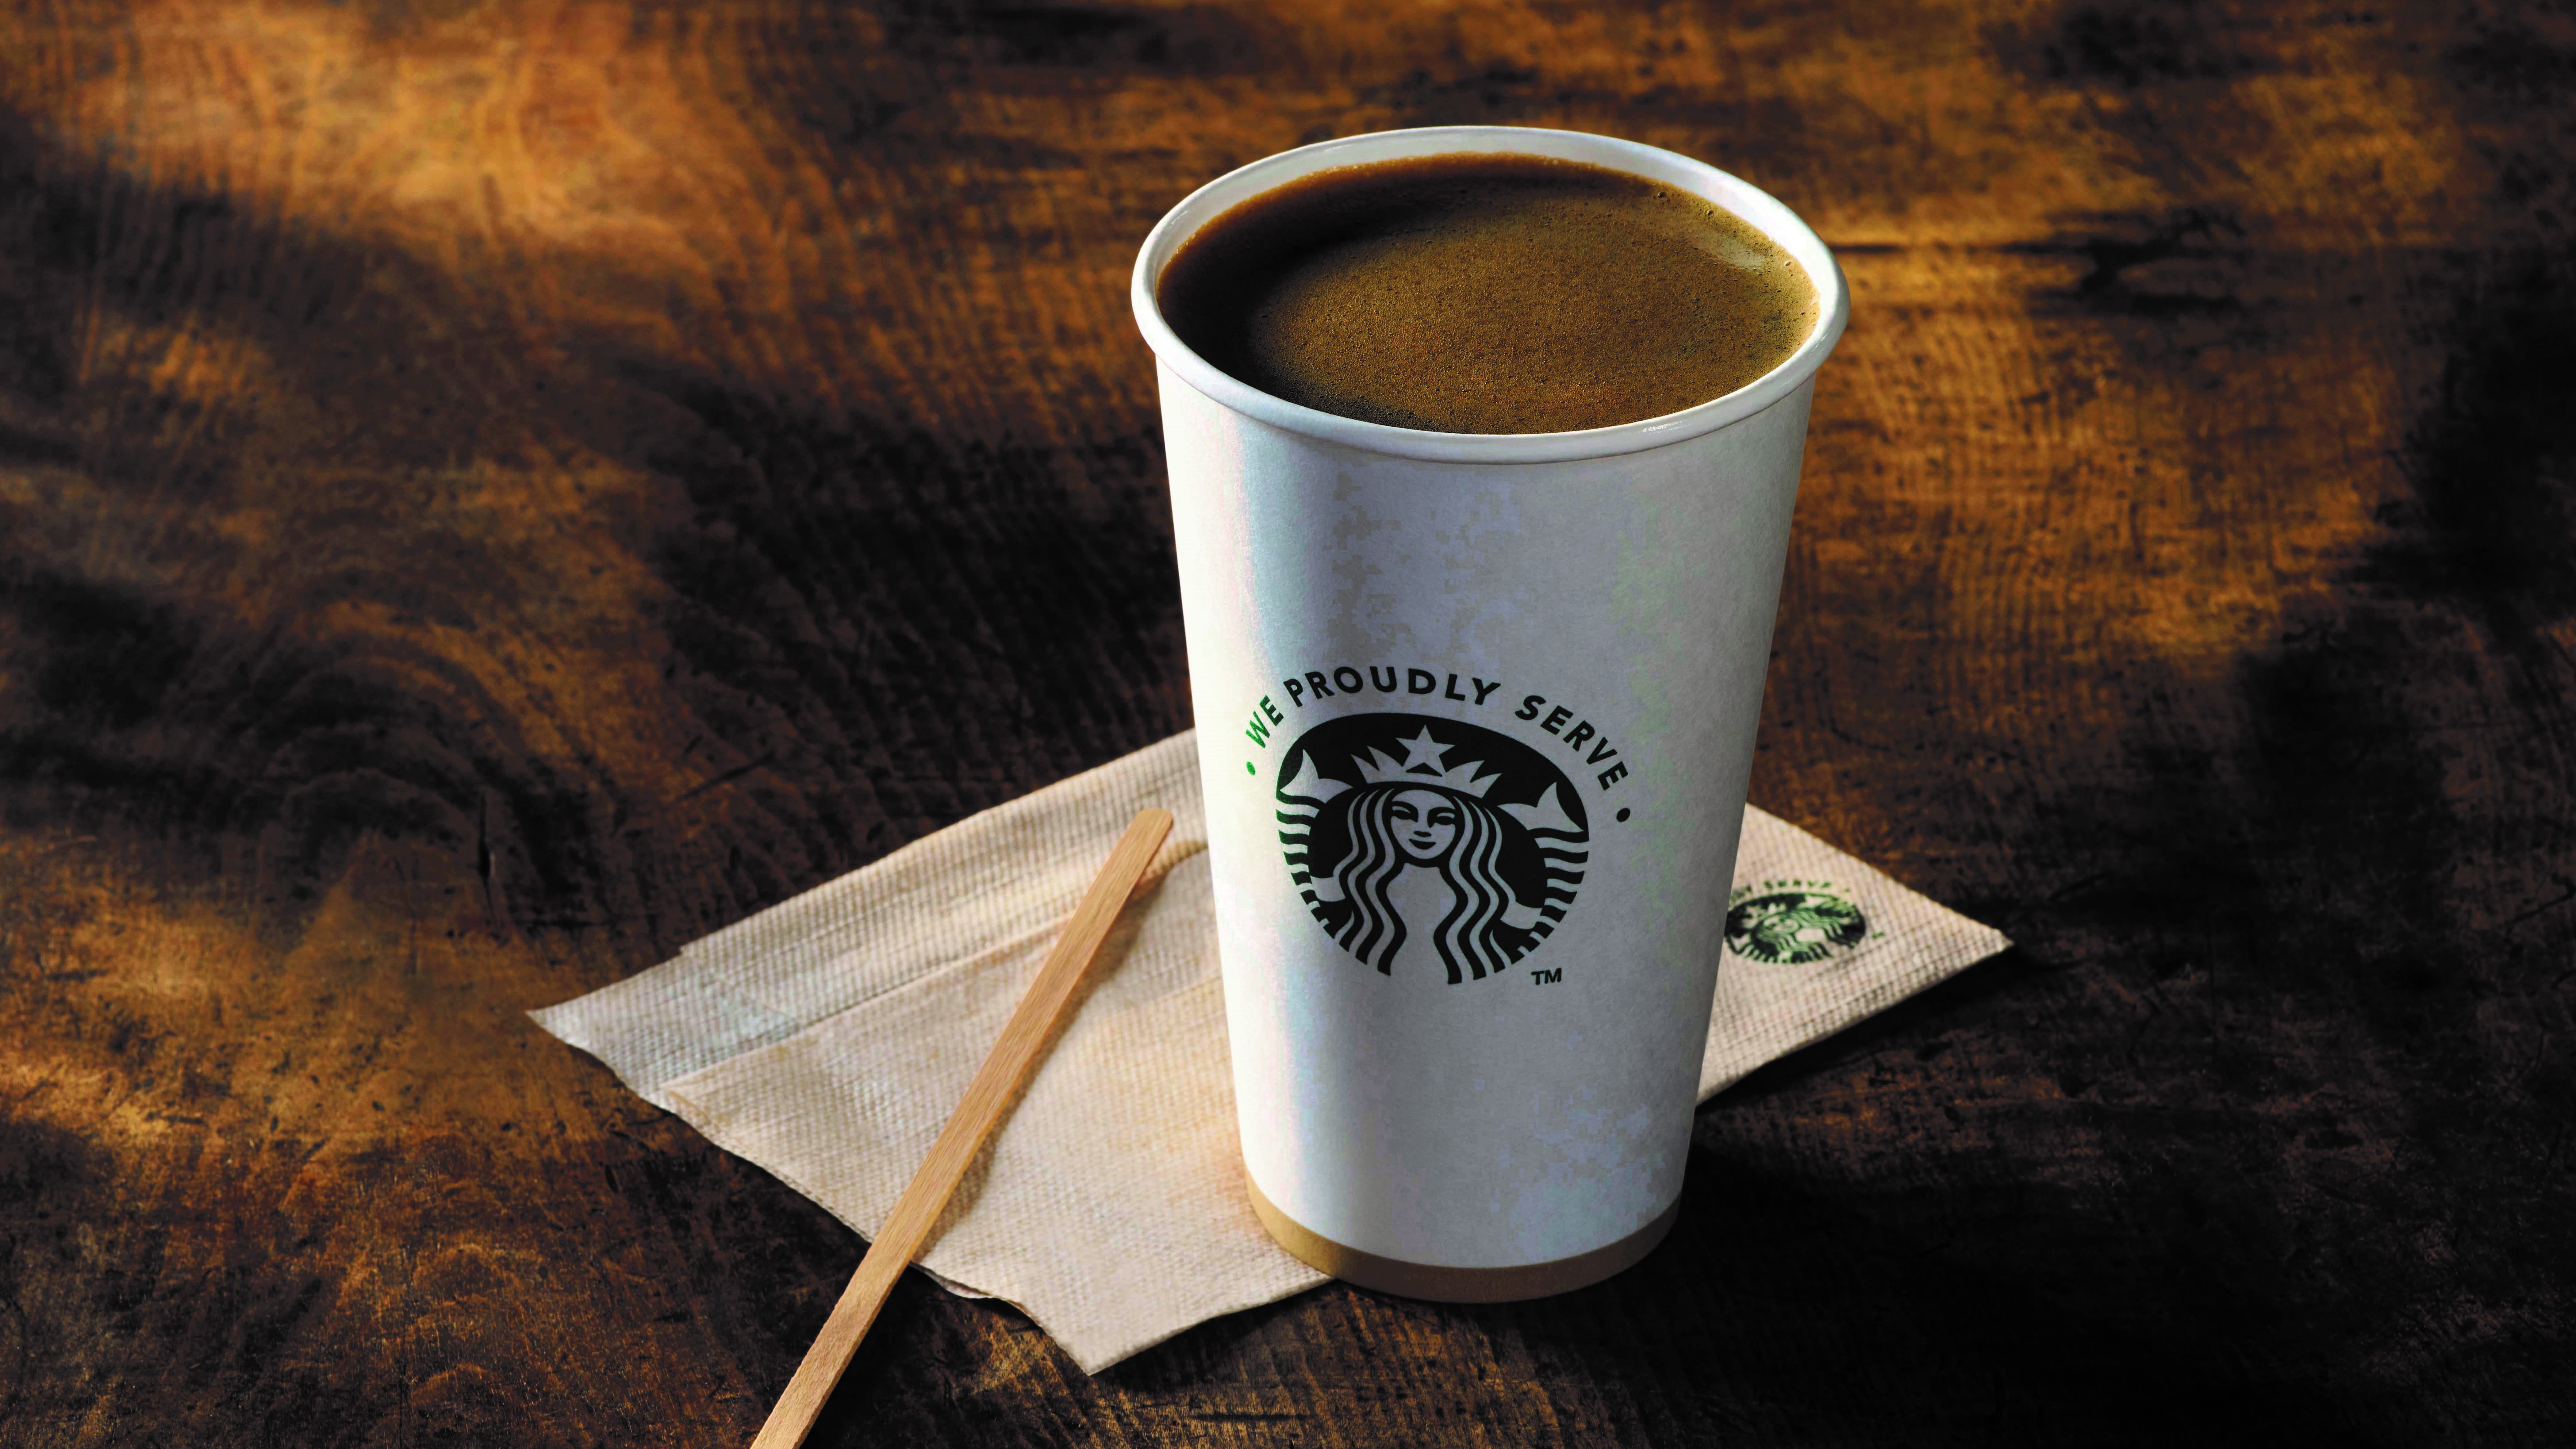 A Starbucks is opening in Englewood at South McCall Road and Oriole Boulevard.